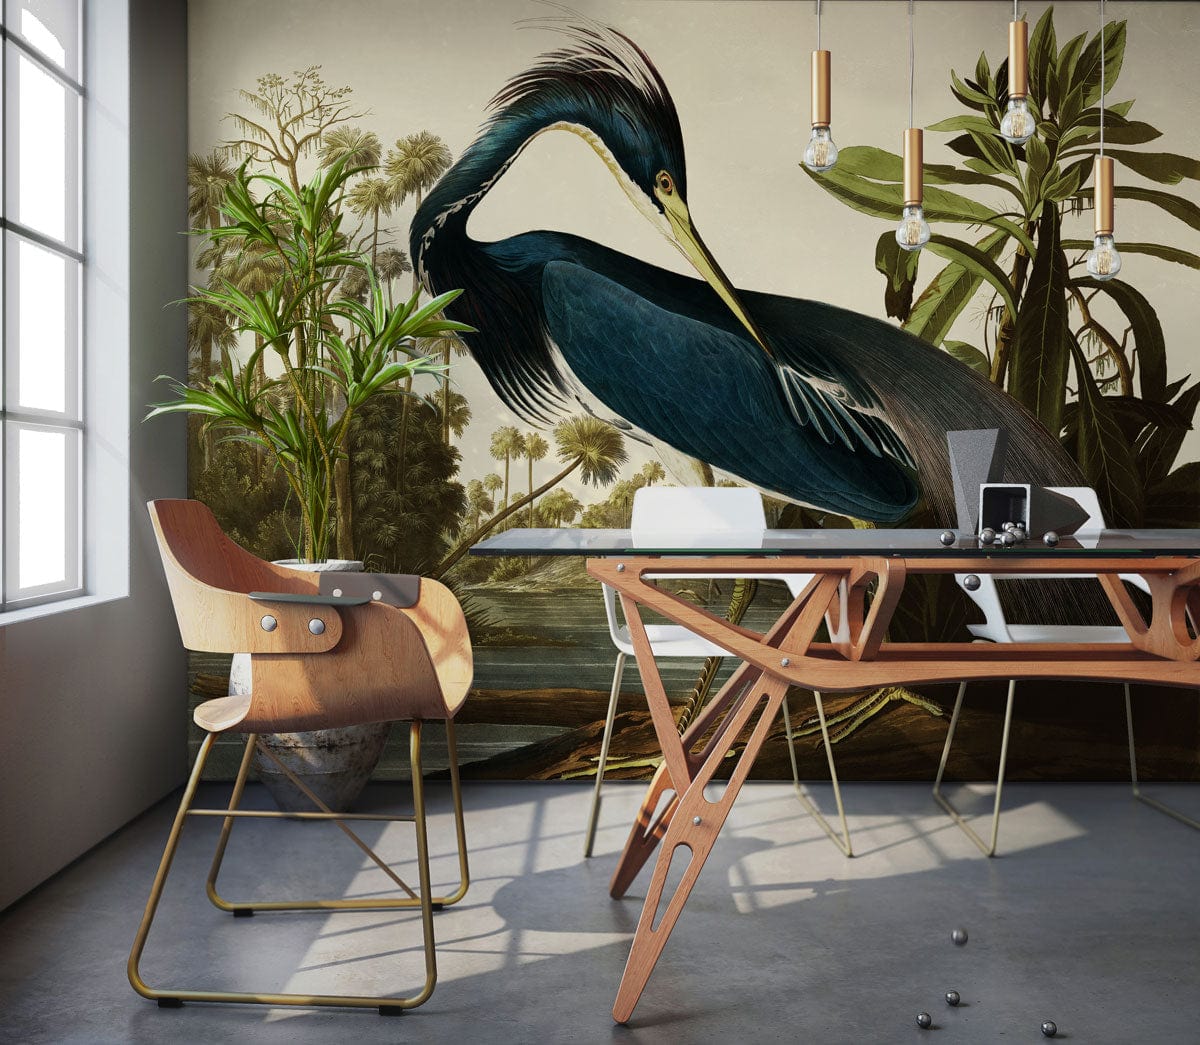 Home Office Bird Heron in the Jungle Scenery Wall Mural